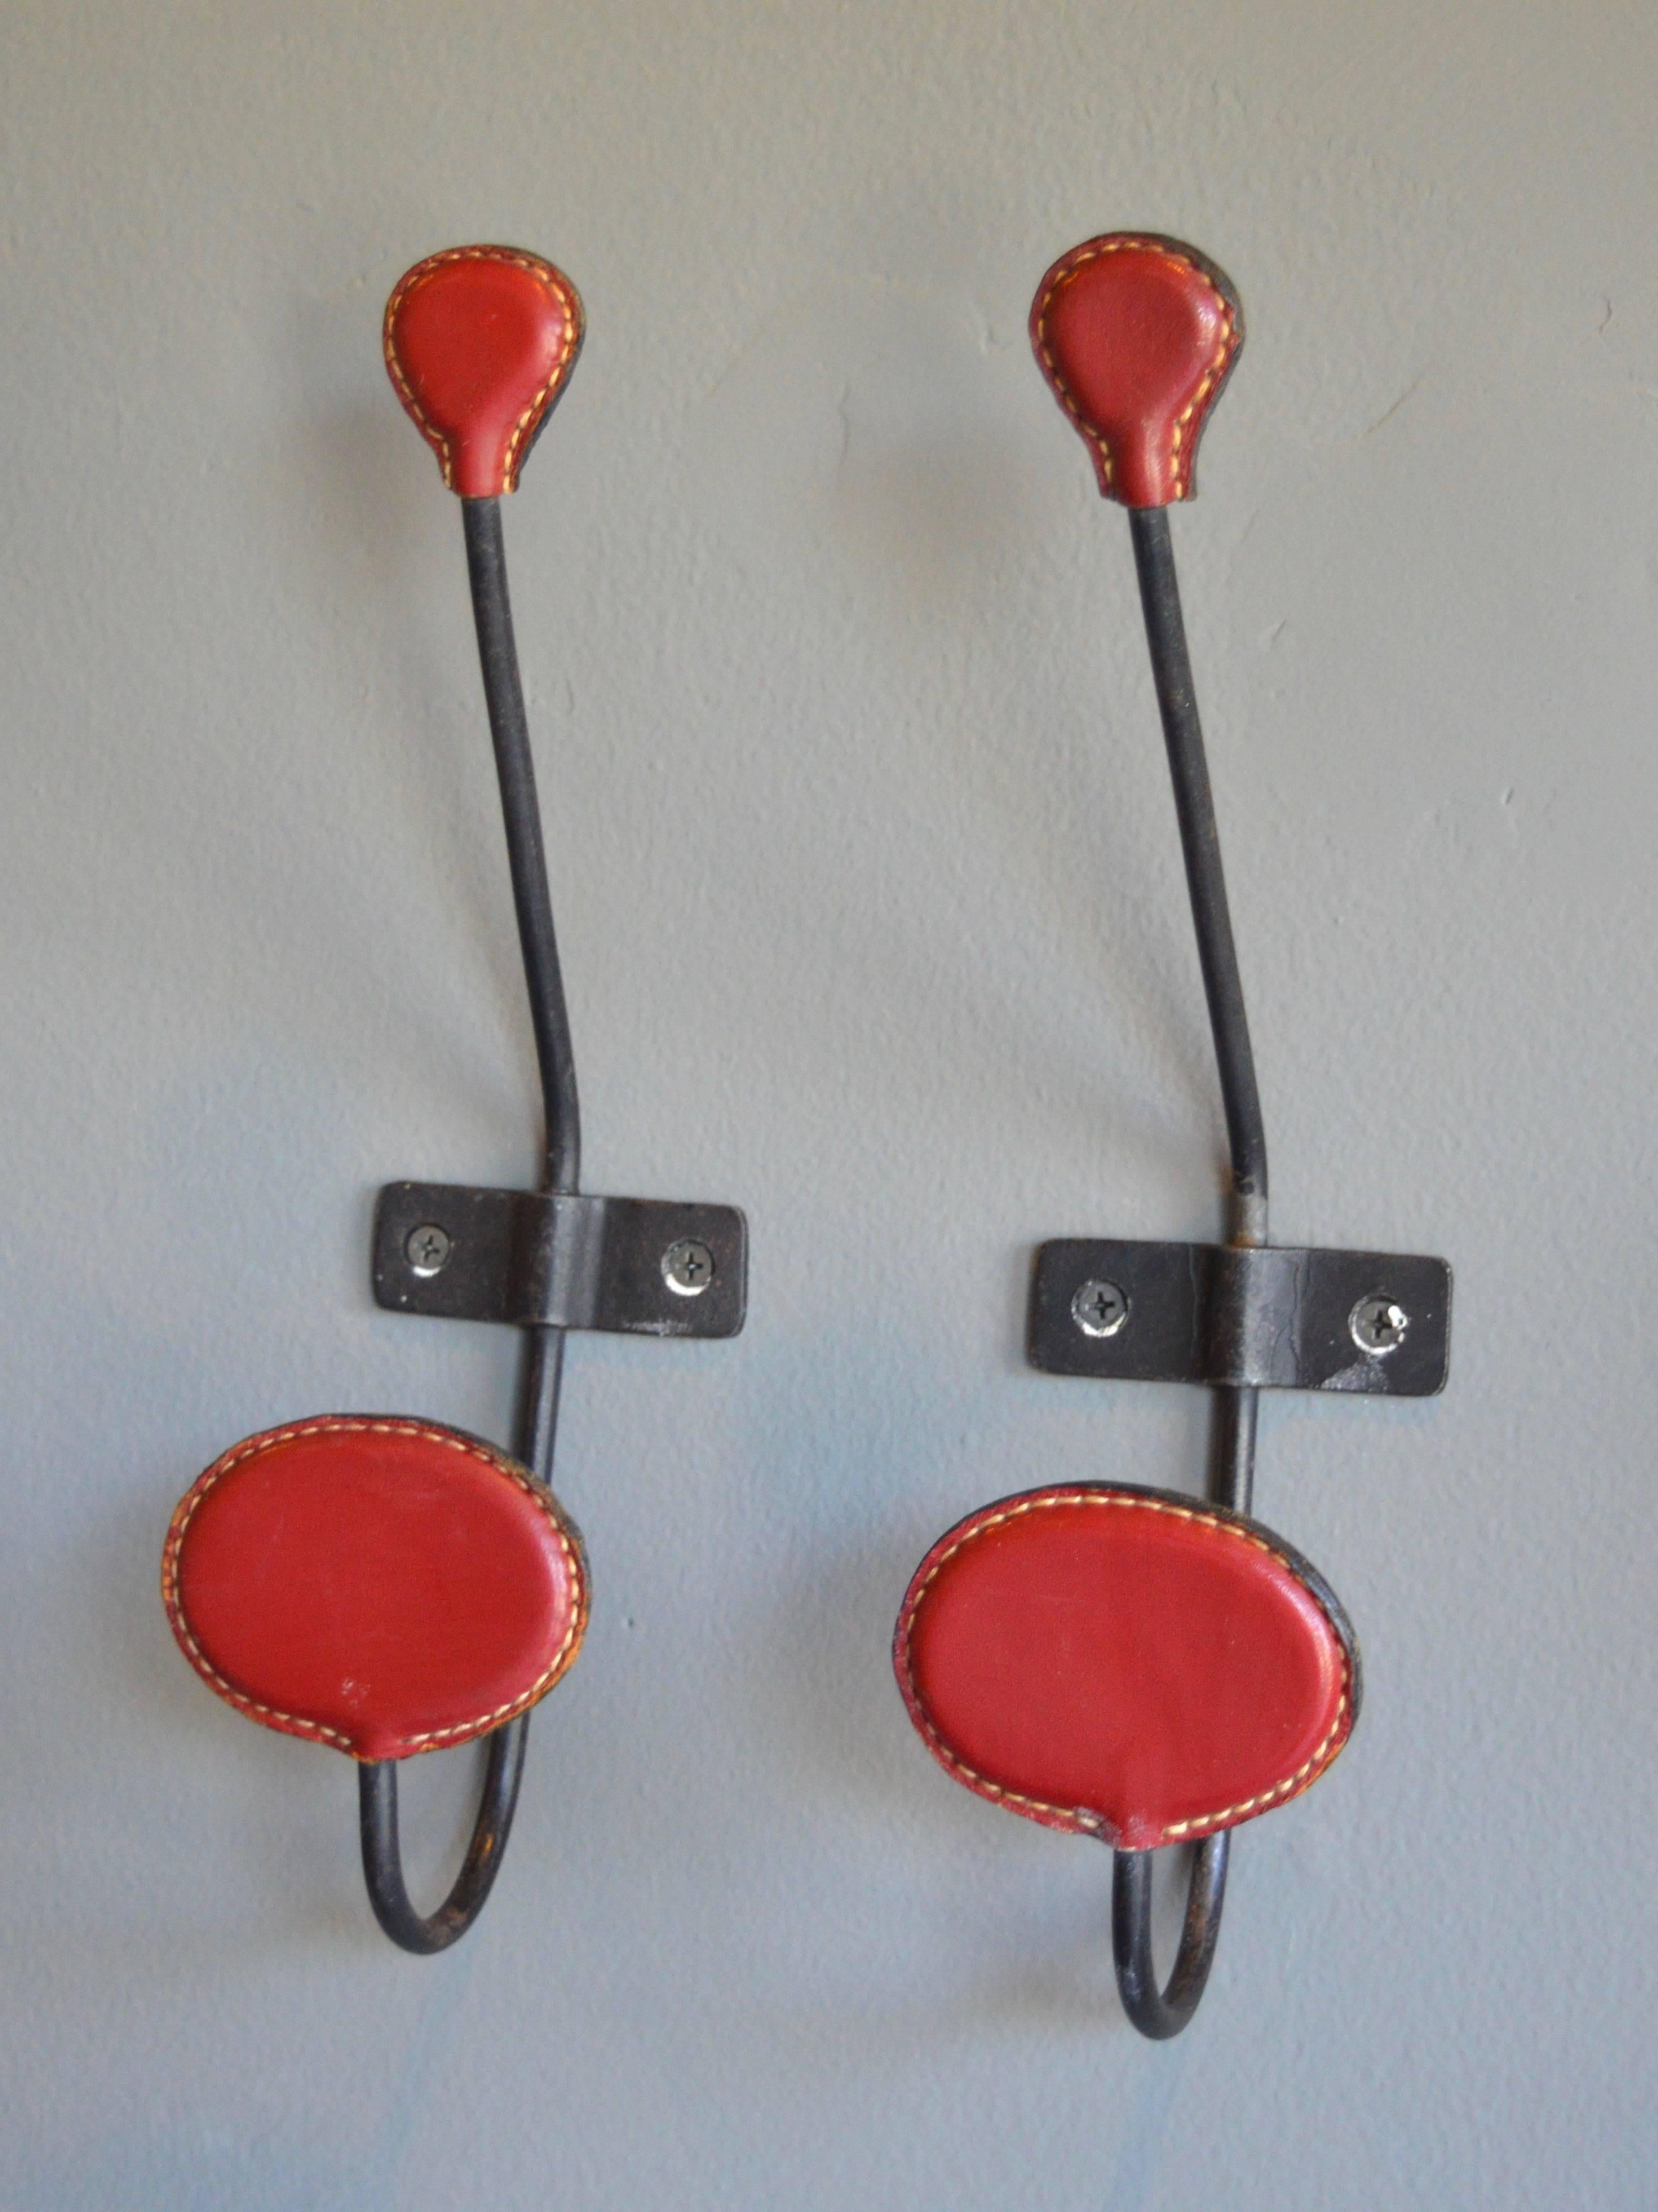 Handsome pair of coat hooks in the style of Jacques Adnet. Iron frame with deep red leather and stitching. The top of the hook has a small tear drop shaped arm and the bottom of the hook has a larger, ovular shaped arm. Good vintage condition. Sold